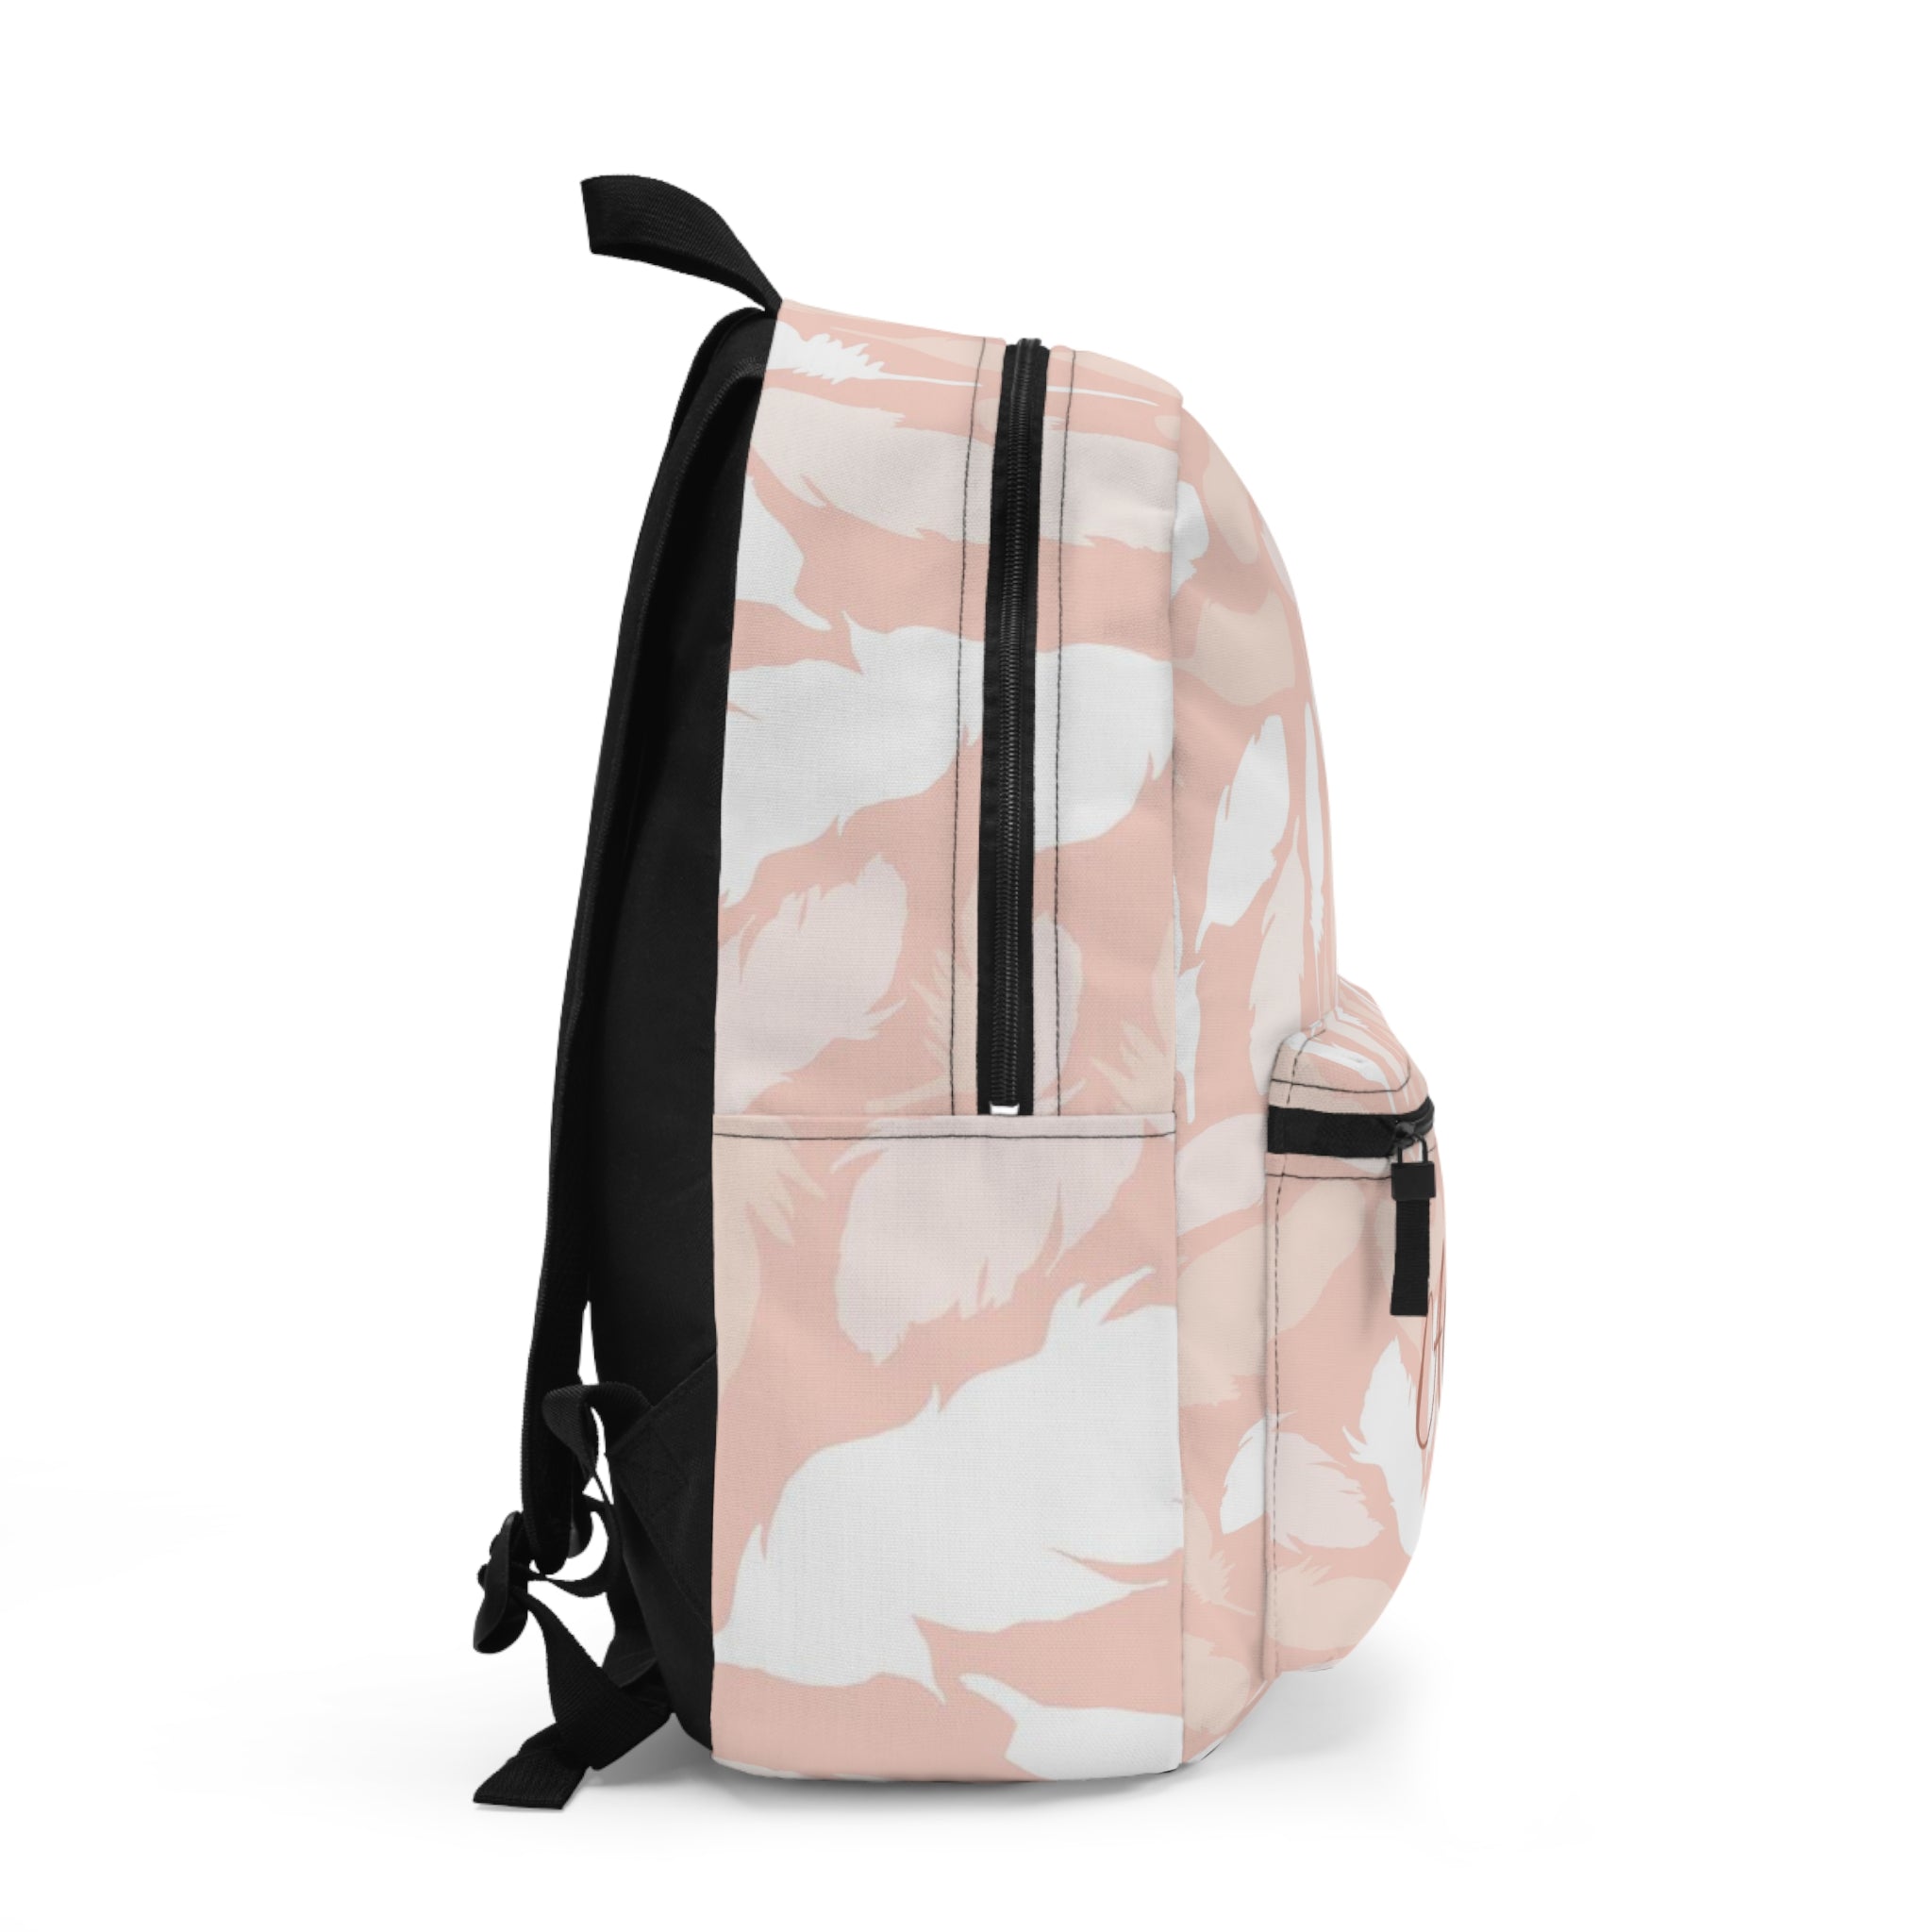 Personalized Backpack by Mint Camo